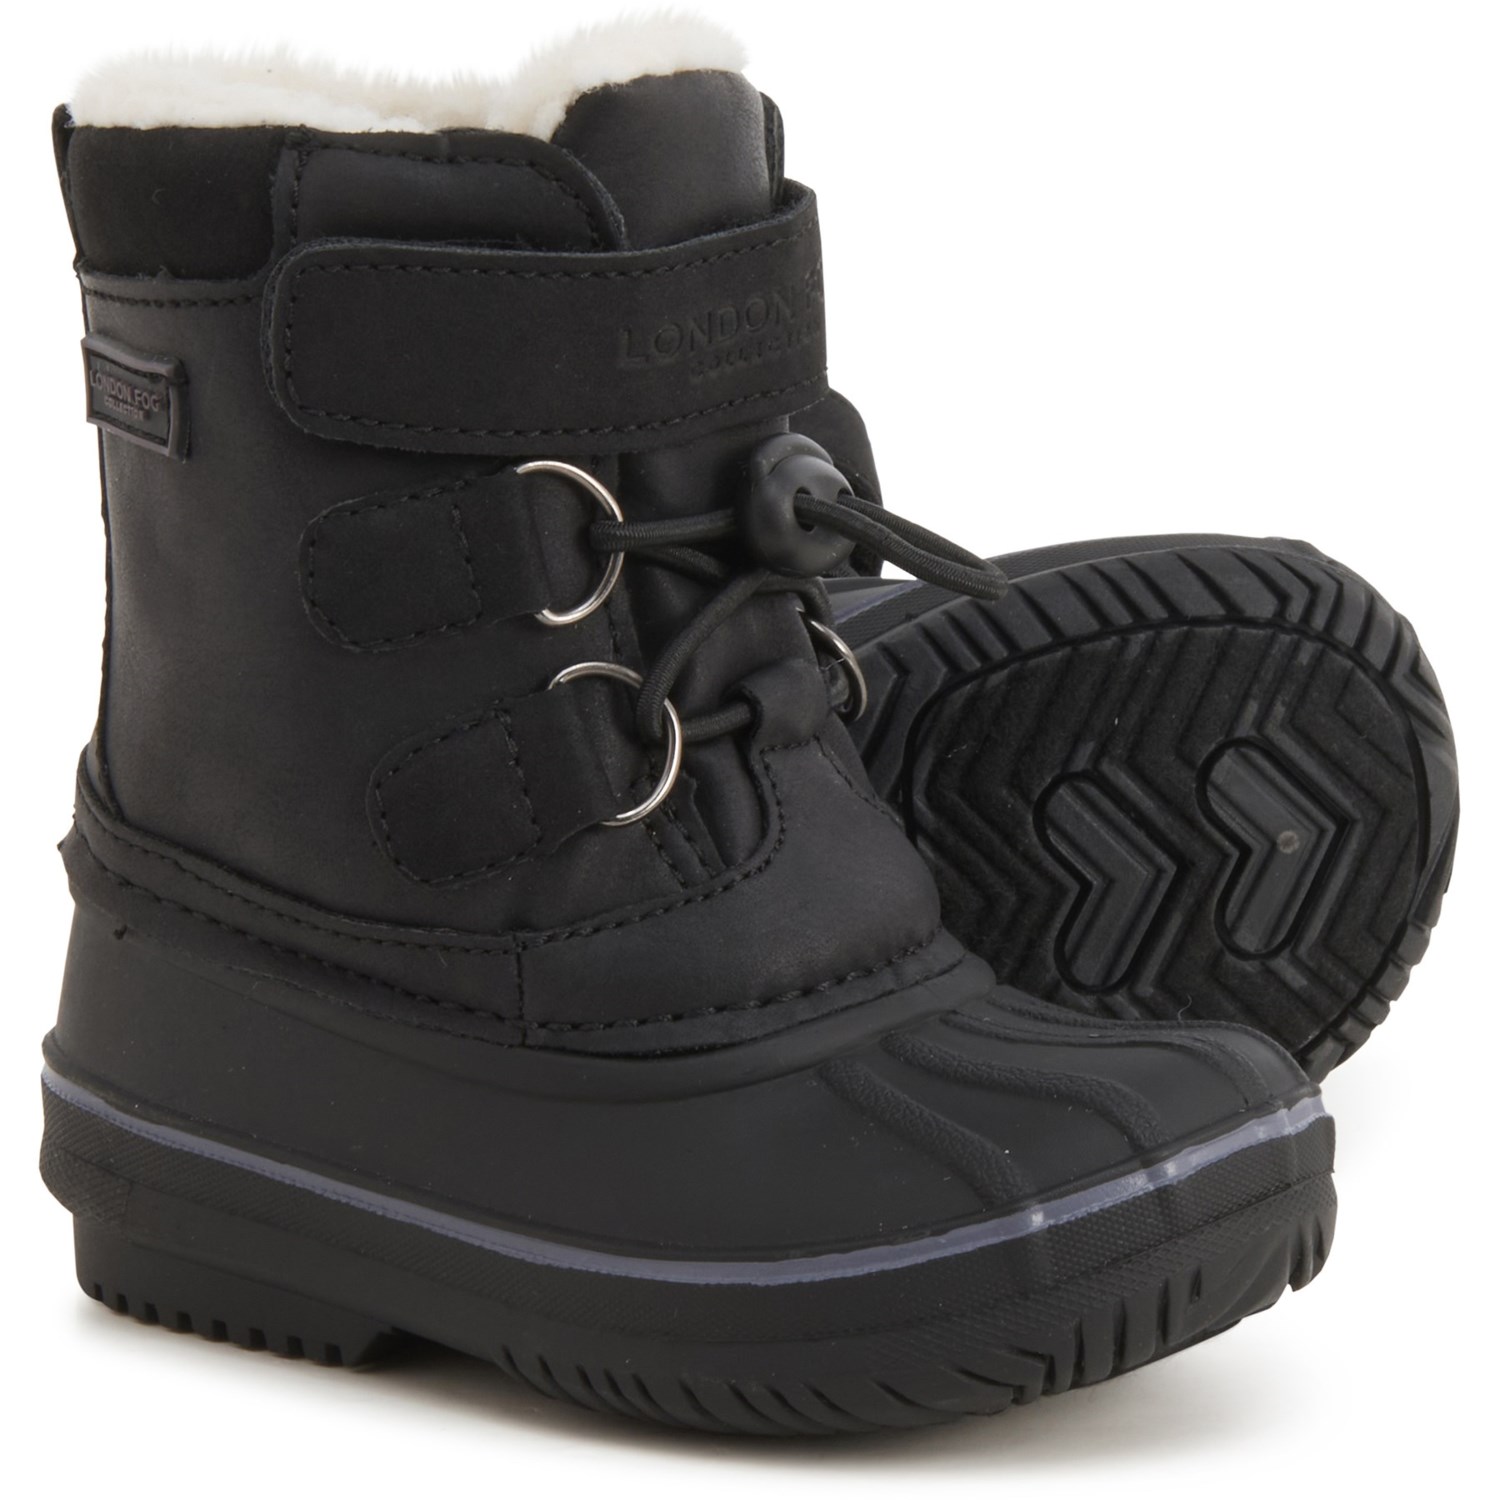 London Fog Oxford Pac Boots (For Toddlers)